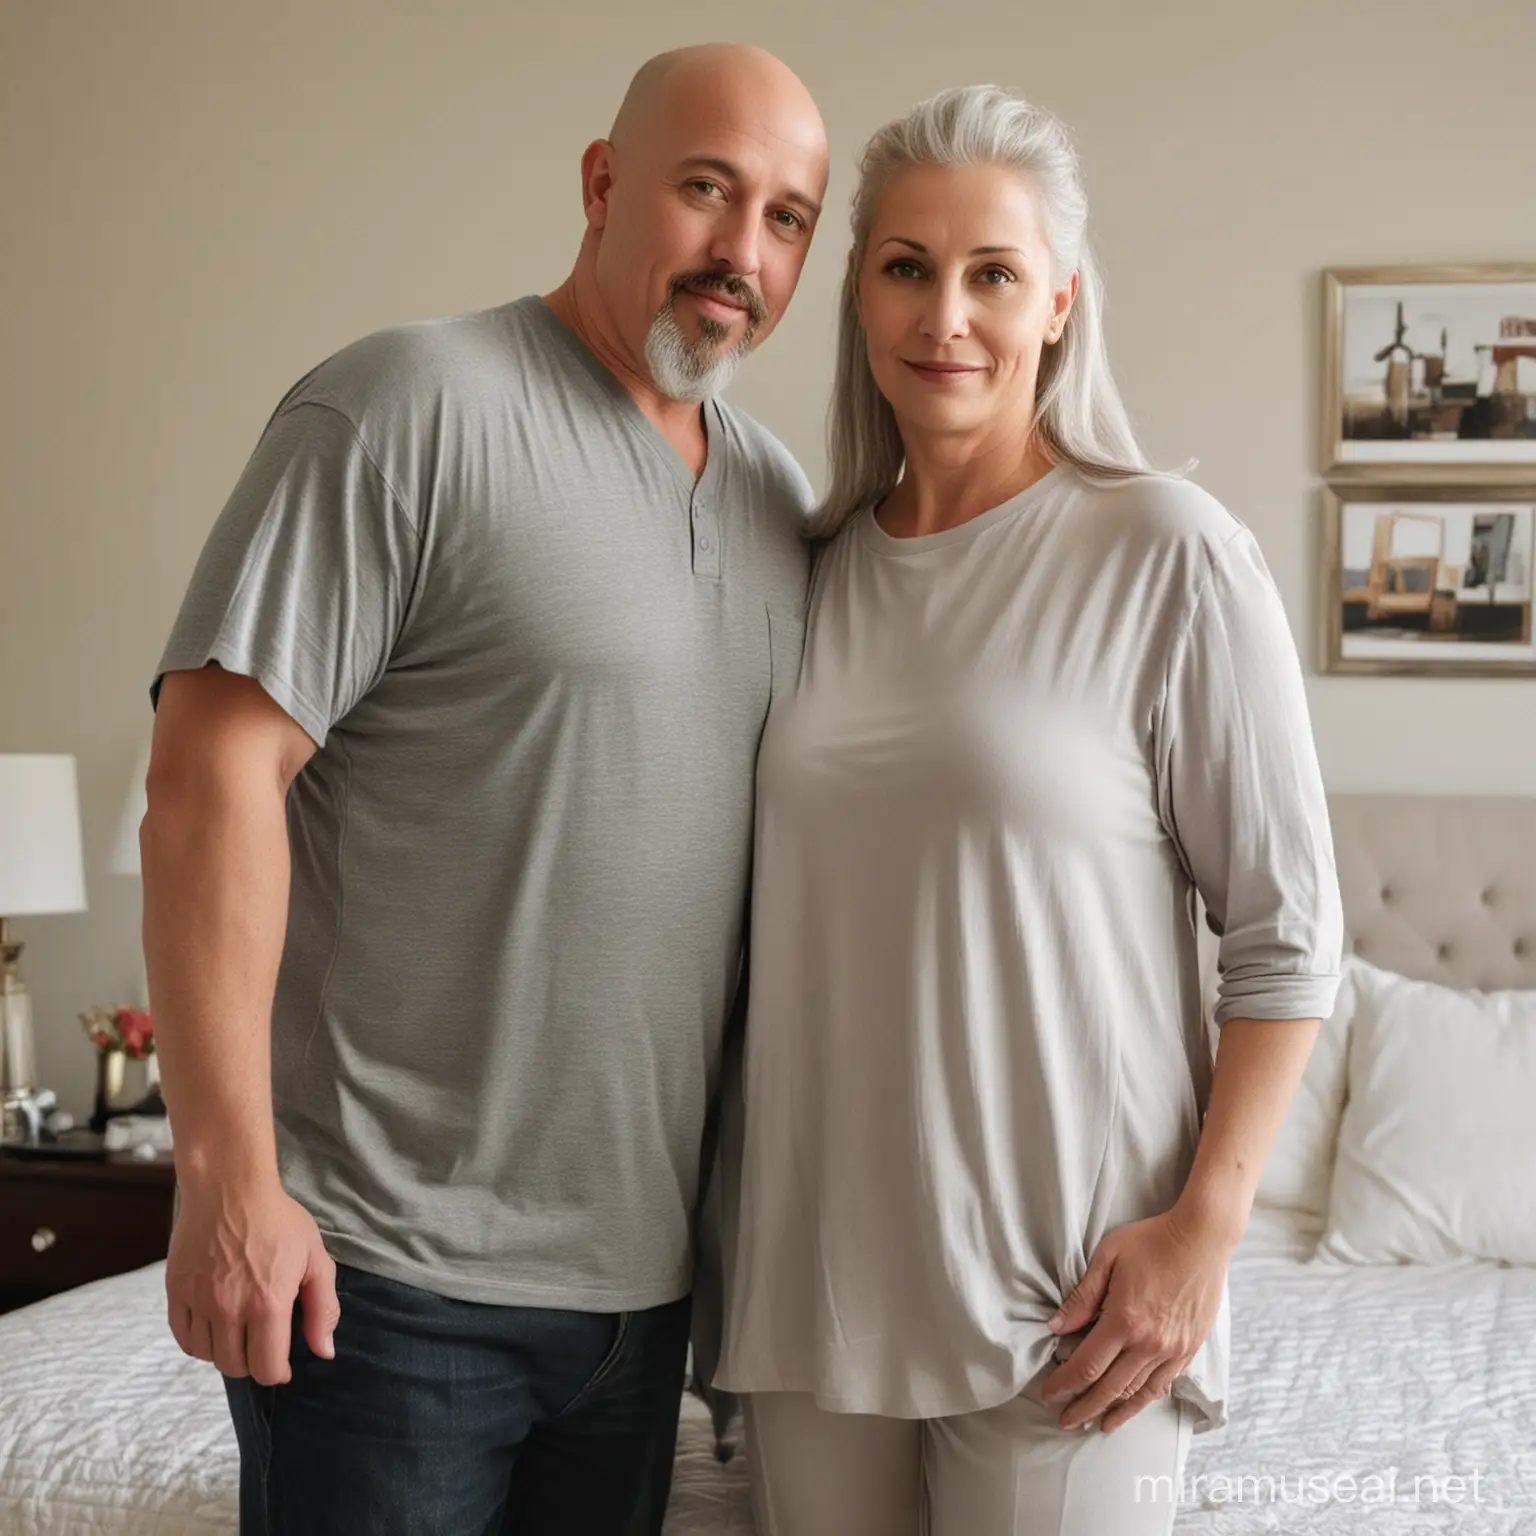 MiddleAged Couple Embracing in Bedroom